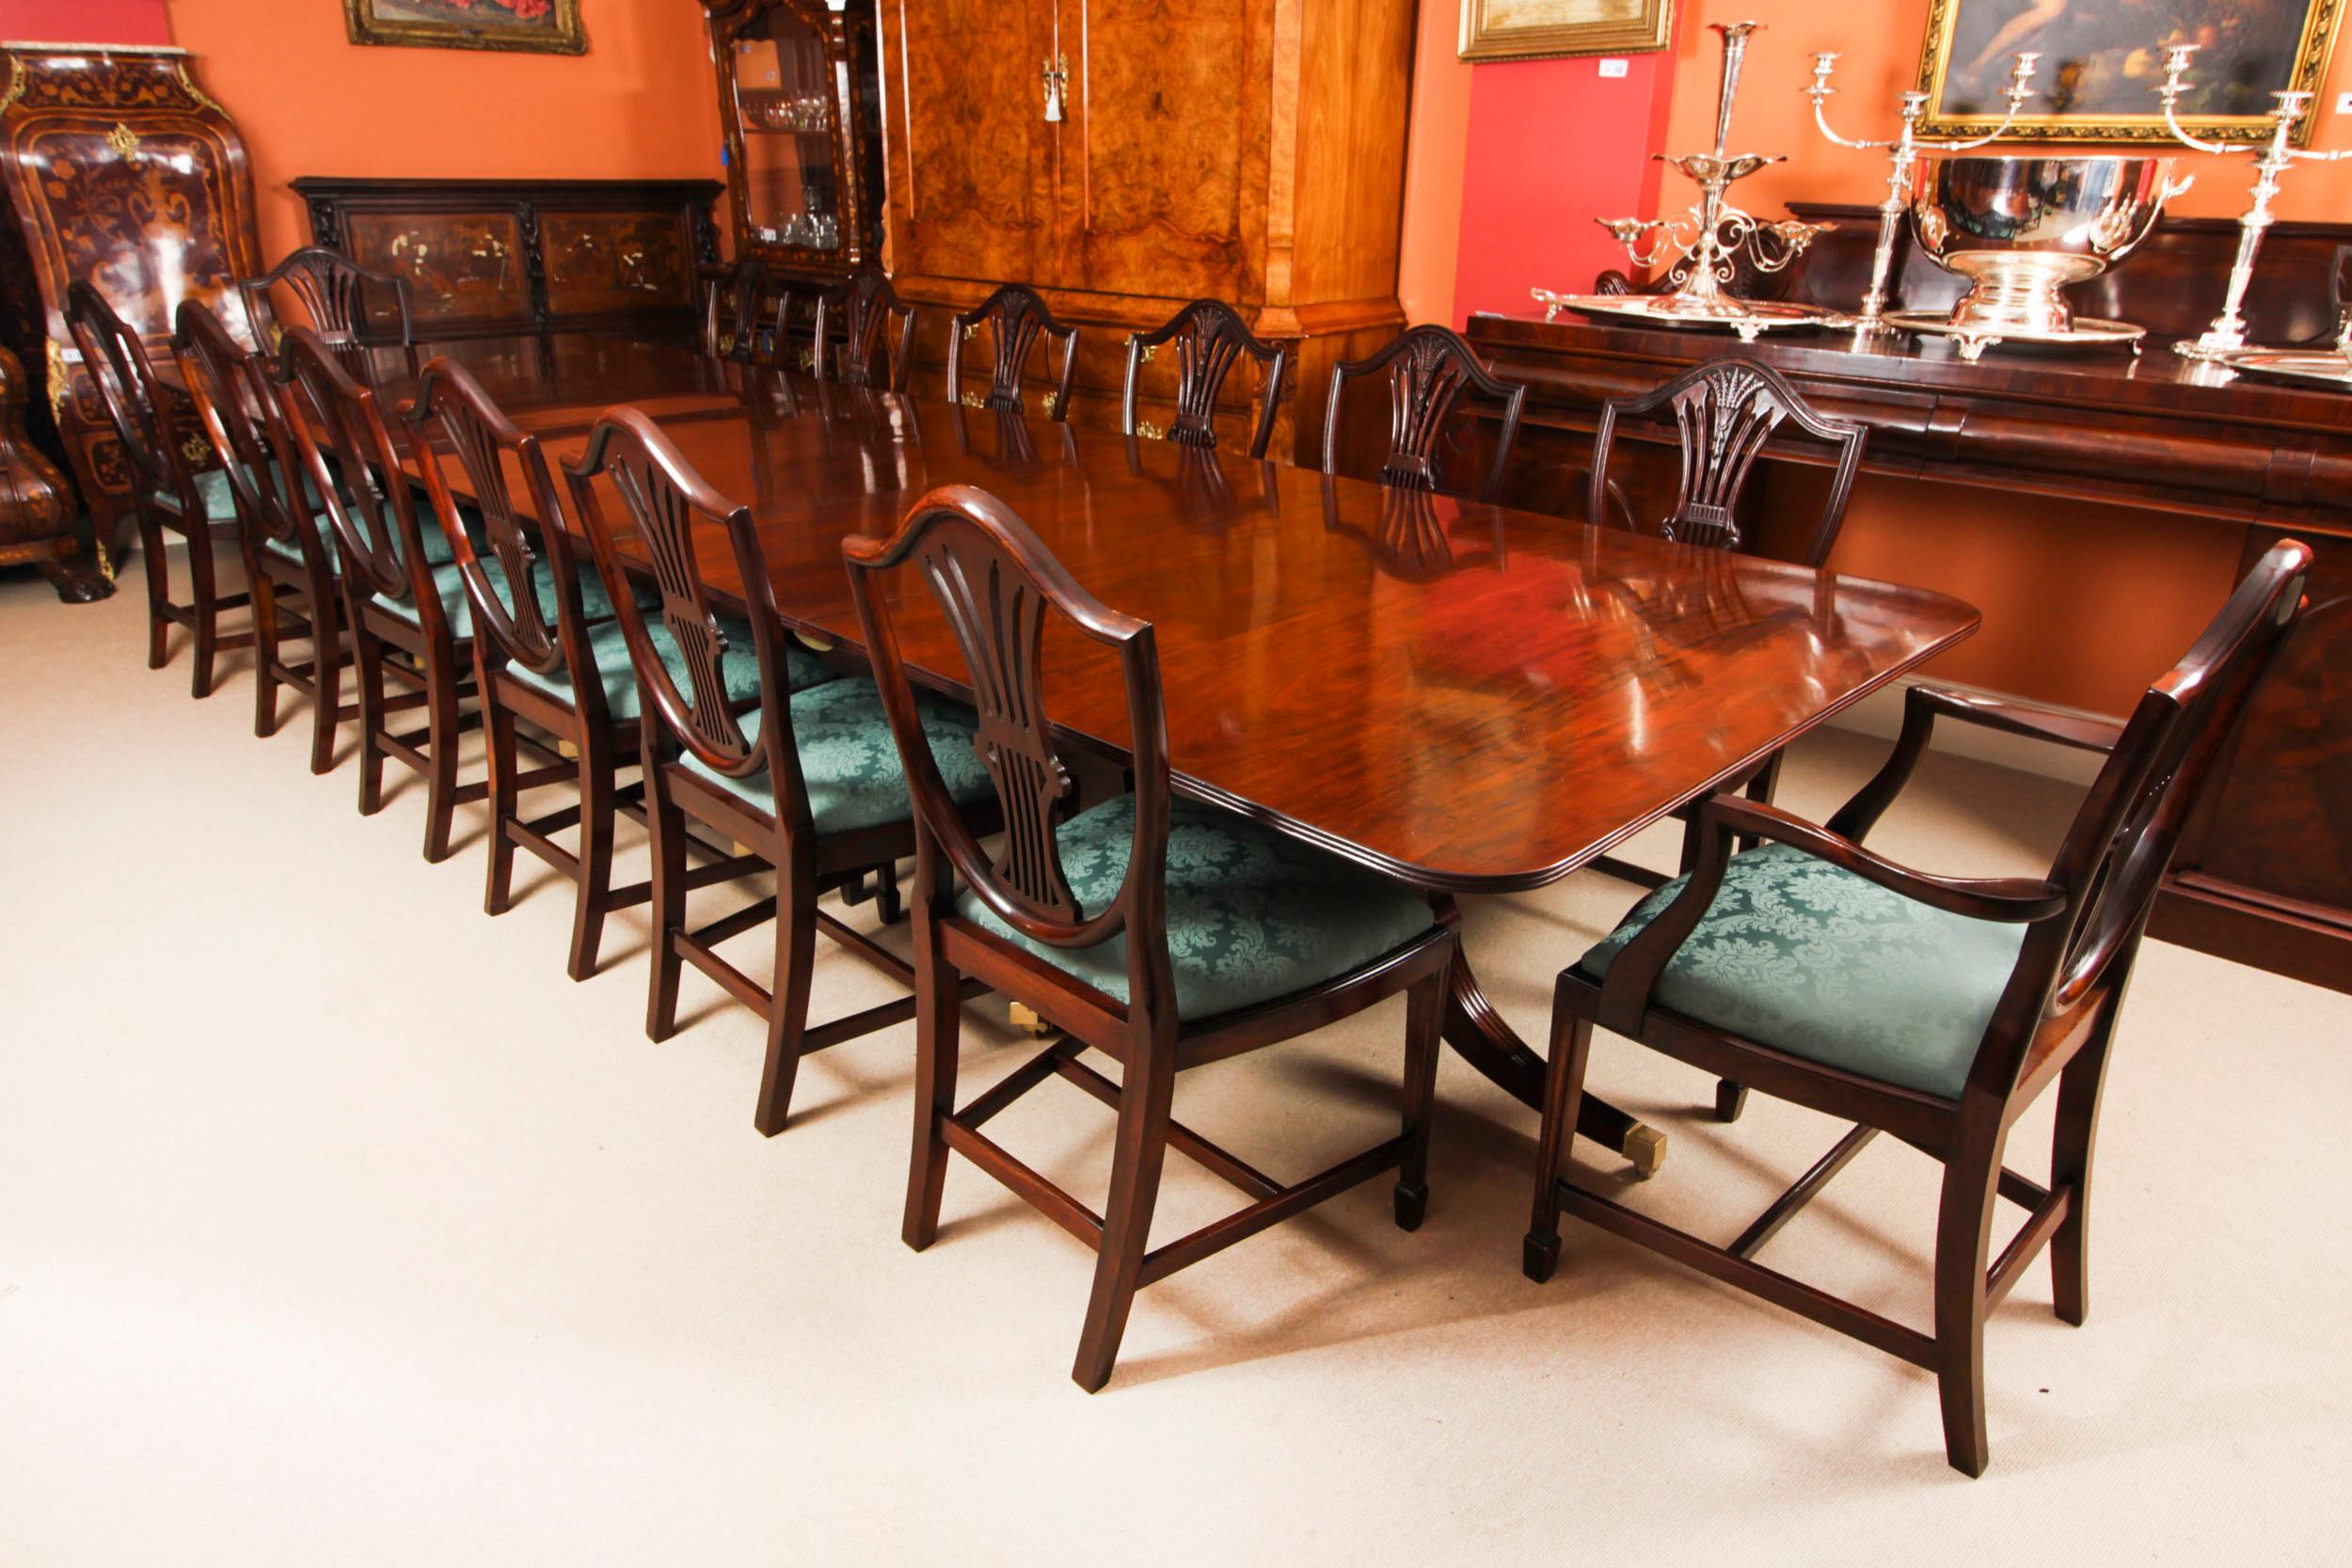 This is an elegant antique Regency Revival dining table that can comfortable seat fourteen people and dates from the second half of the 19th Century.

The table has two leaves which can be added or removed as required to suit the occasion and it